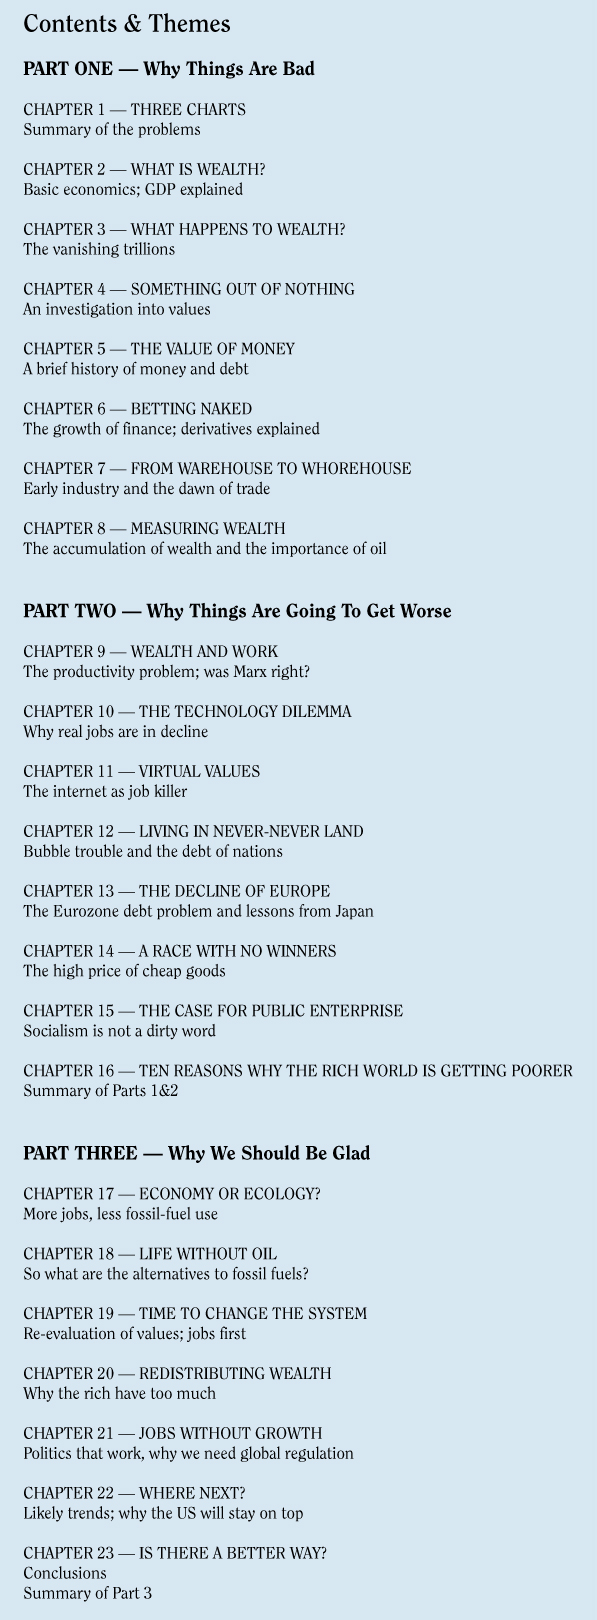 Contents and themes from the book Why Things Are Going to Get Worse